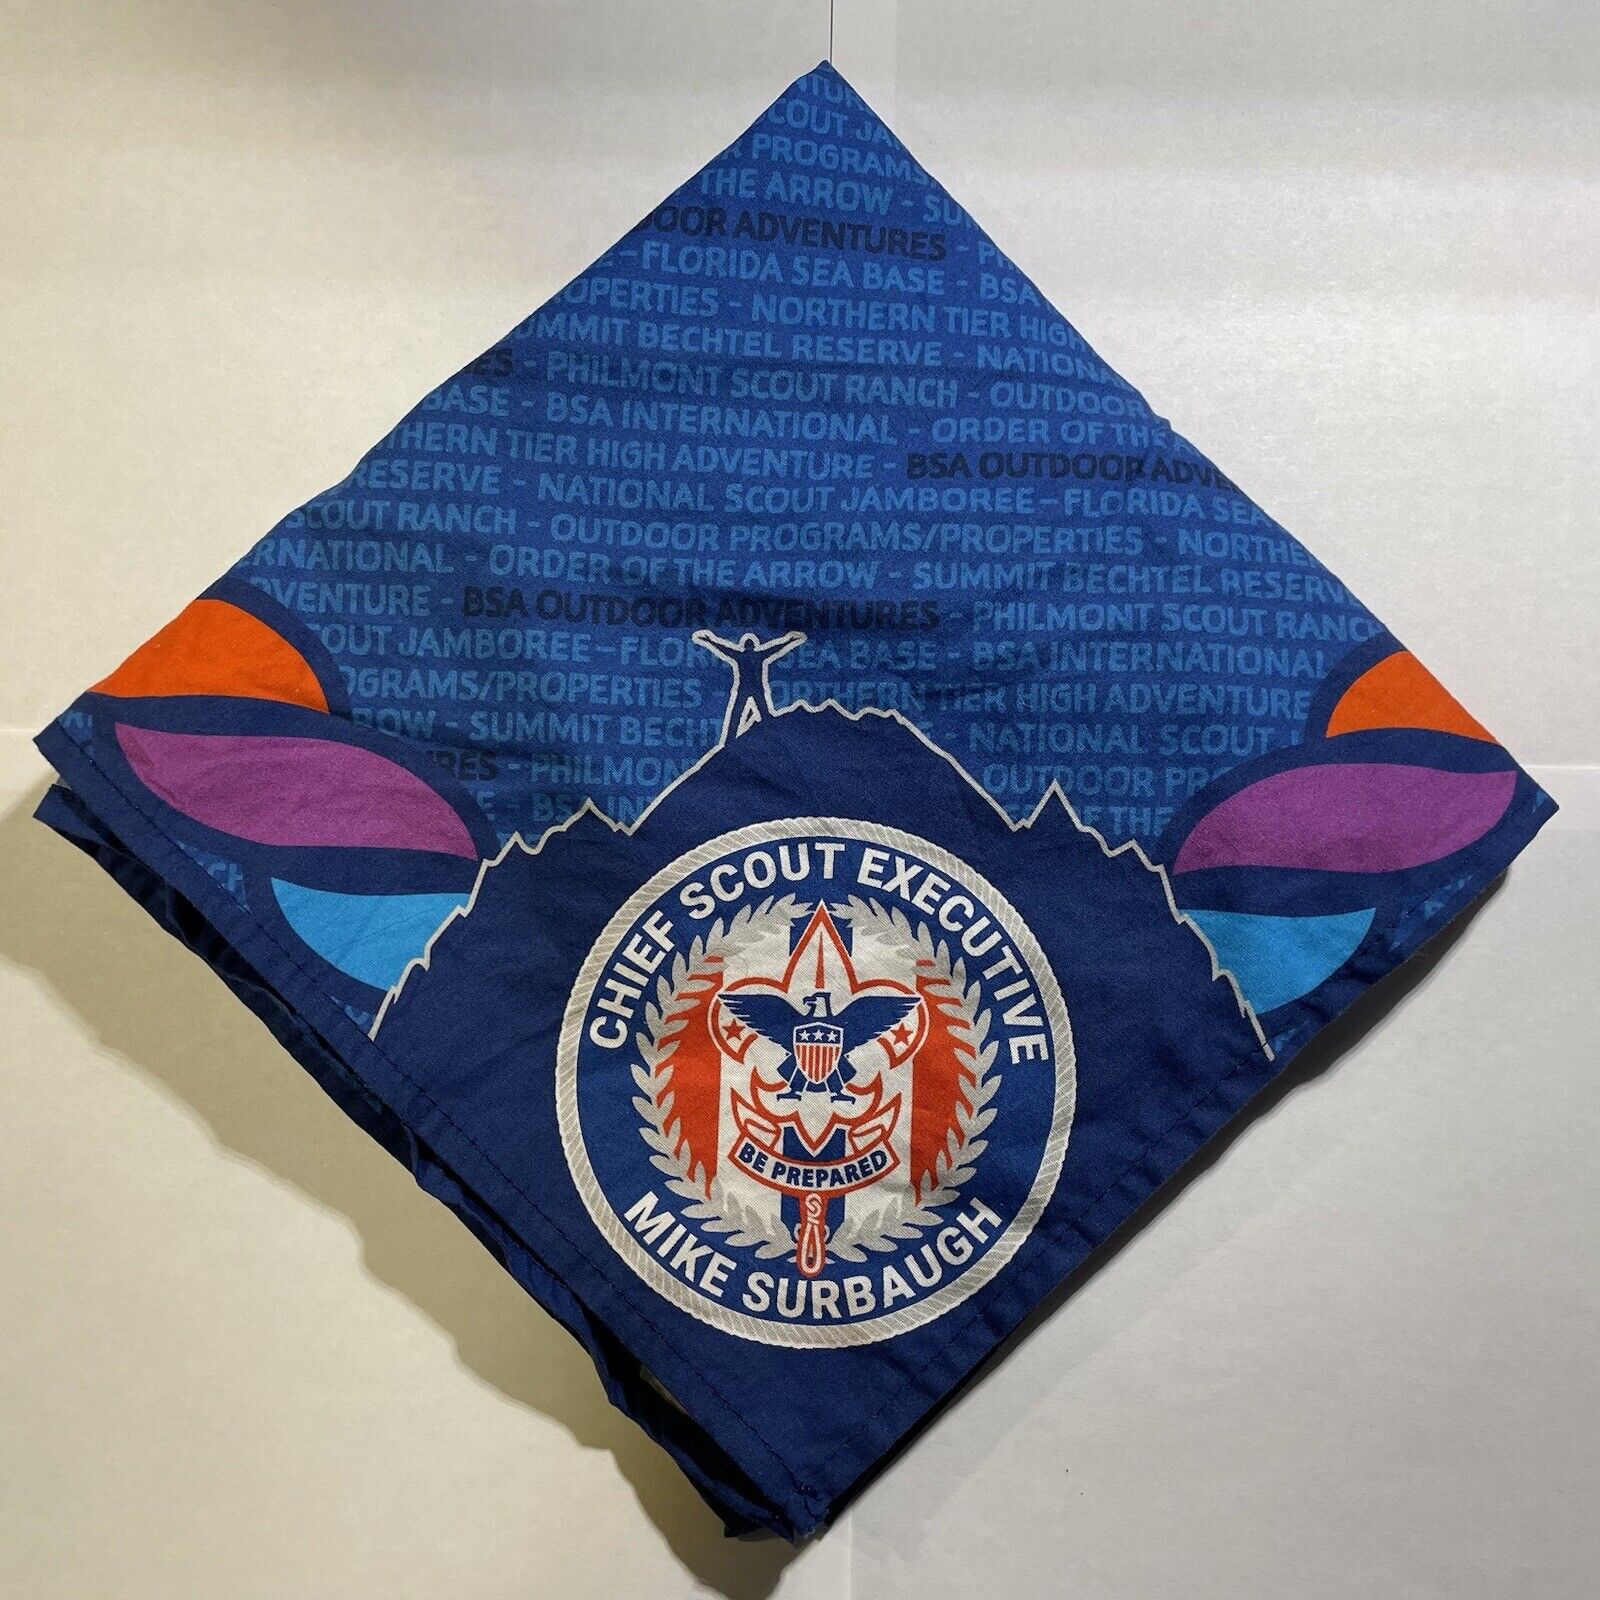 BSA Chief Scout Executive Mike Surbaugh Neckerchief (used)